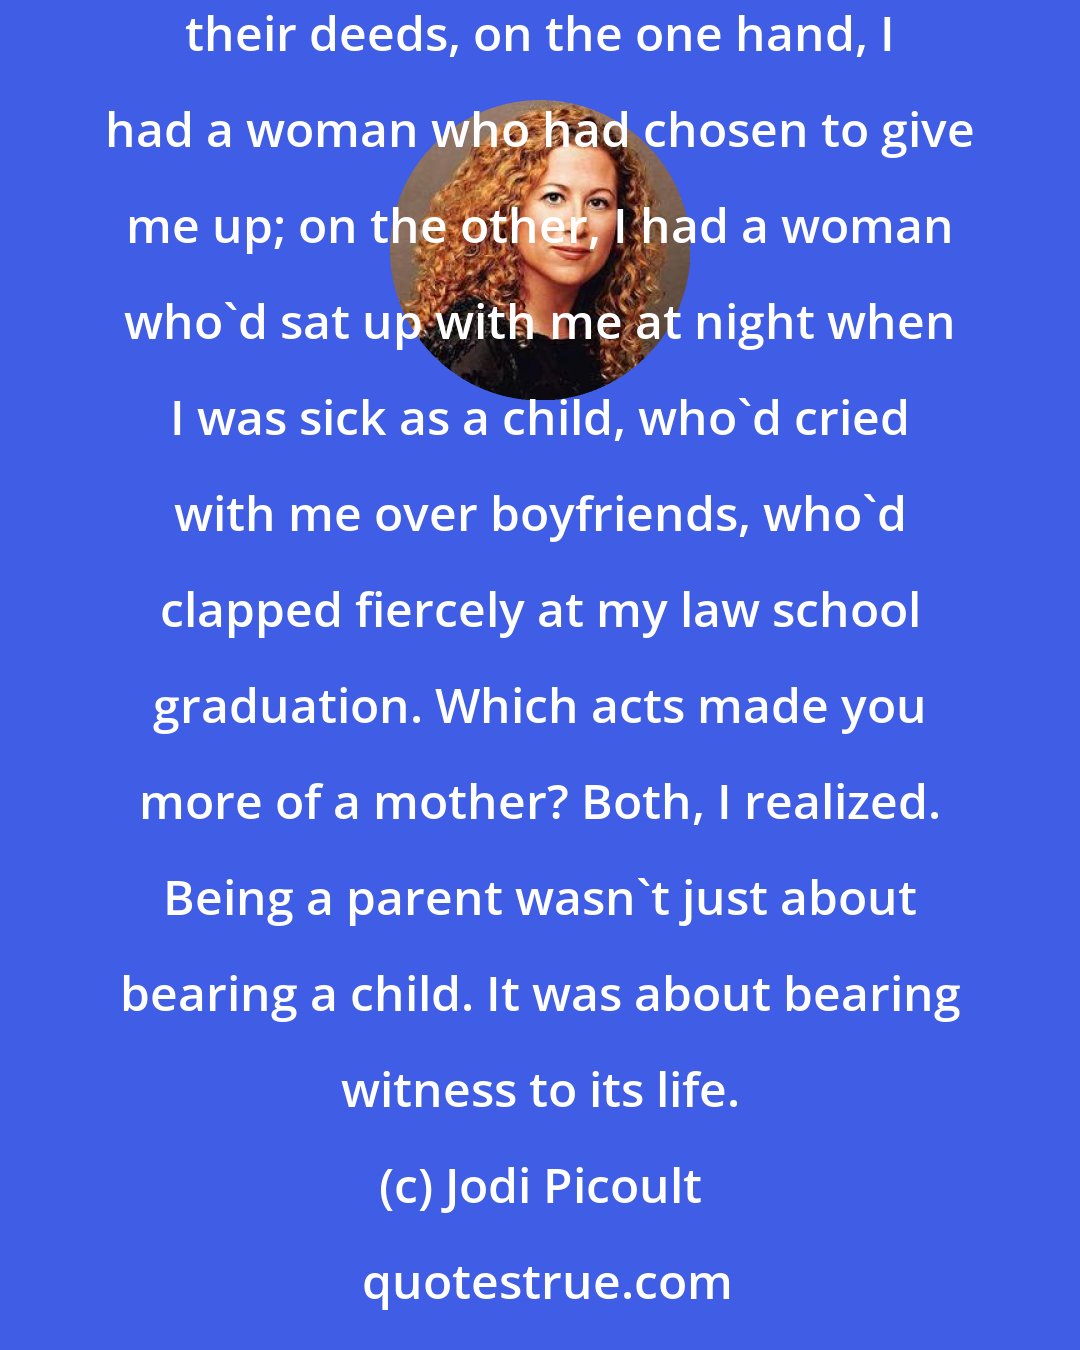 Jodi Picoult: Was it the act of giving birth that made you a mother? Did you lose that label when you relinquished your child? If people were measured by their deeds, on the one hand, I had a woman who had chosen to give me up; on the other, I had a woman who'd sat up with me at night when I was sick as a child, who'd cried with me over boyfriends, who'd clapped fiercely at my law school graduation. Which acts made you more of a mother? Both, I realized. Being a parent wasn't just about bearing a child. It was about bearing witness to its life.